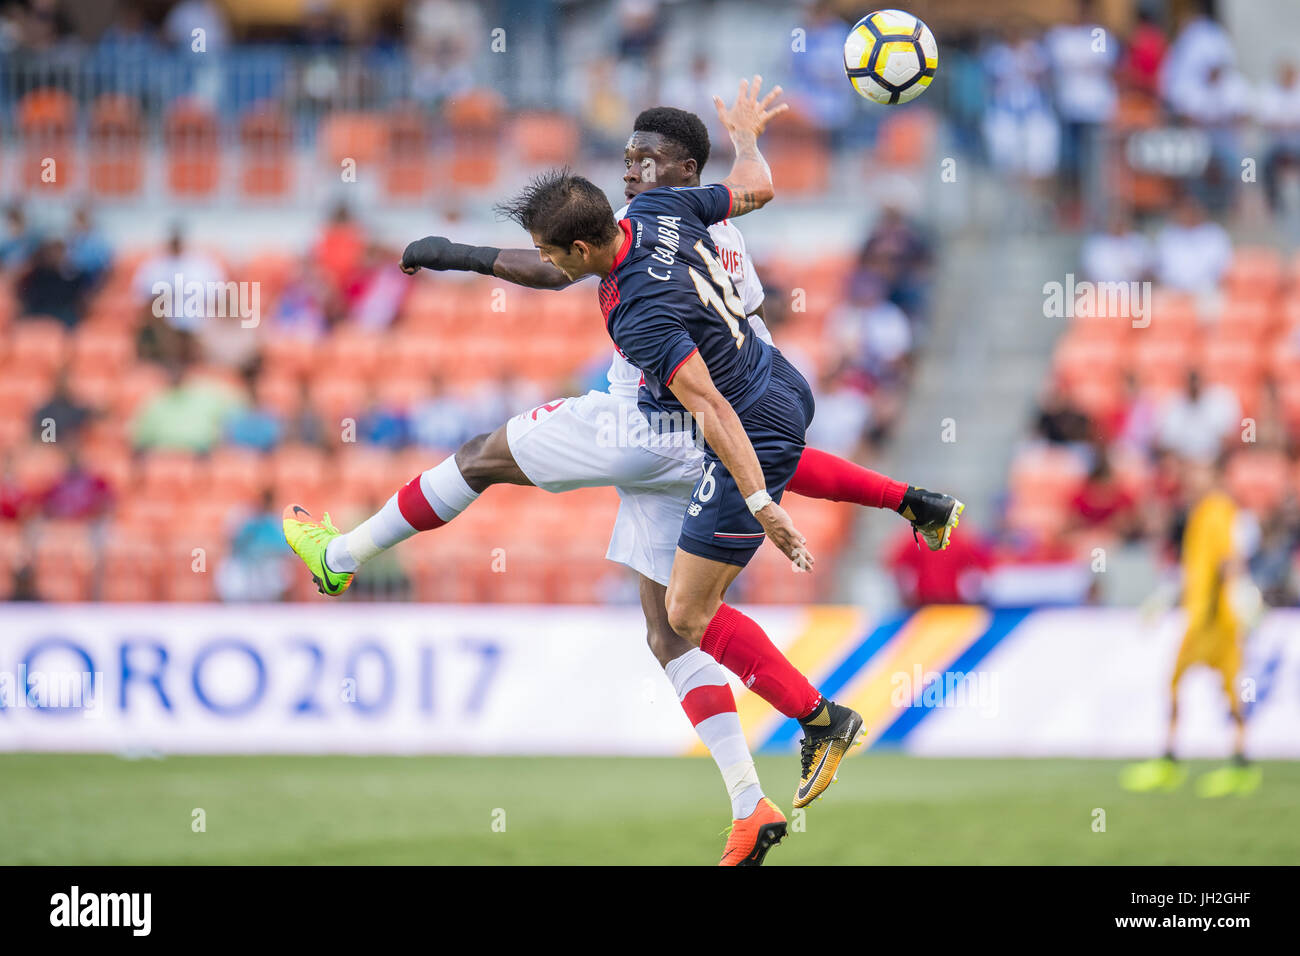 Houston, Texas, USA. 11th July, 2017. Costa Rica defender Christian Gamboa (16) and Canada midfielder Alphonso Davies (12) battle during the 1st half of an international CONCACAF Gold Cup soccer match between Canada and Costa Rica at BBVA Compass Stadium in Houston, TX on July 11th, 2017. The game ended in a 1-1 draw. Credit: Trask Smith/ZUMA Wire/Alamy Live News Stock Photo